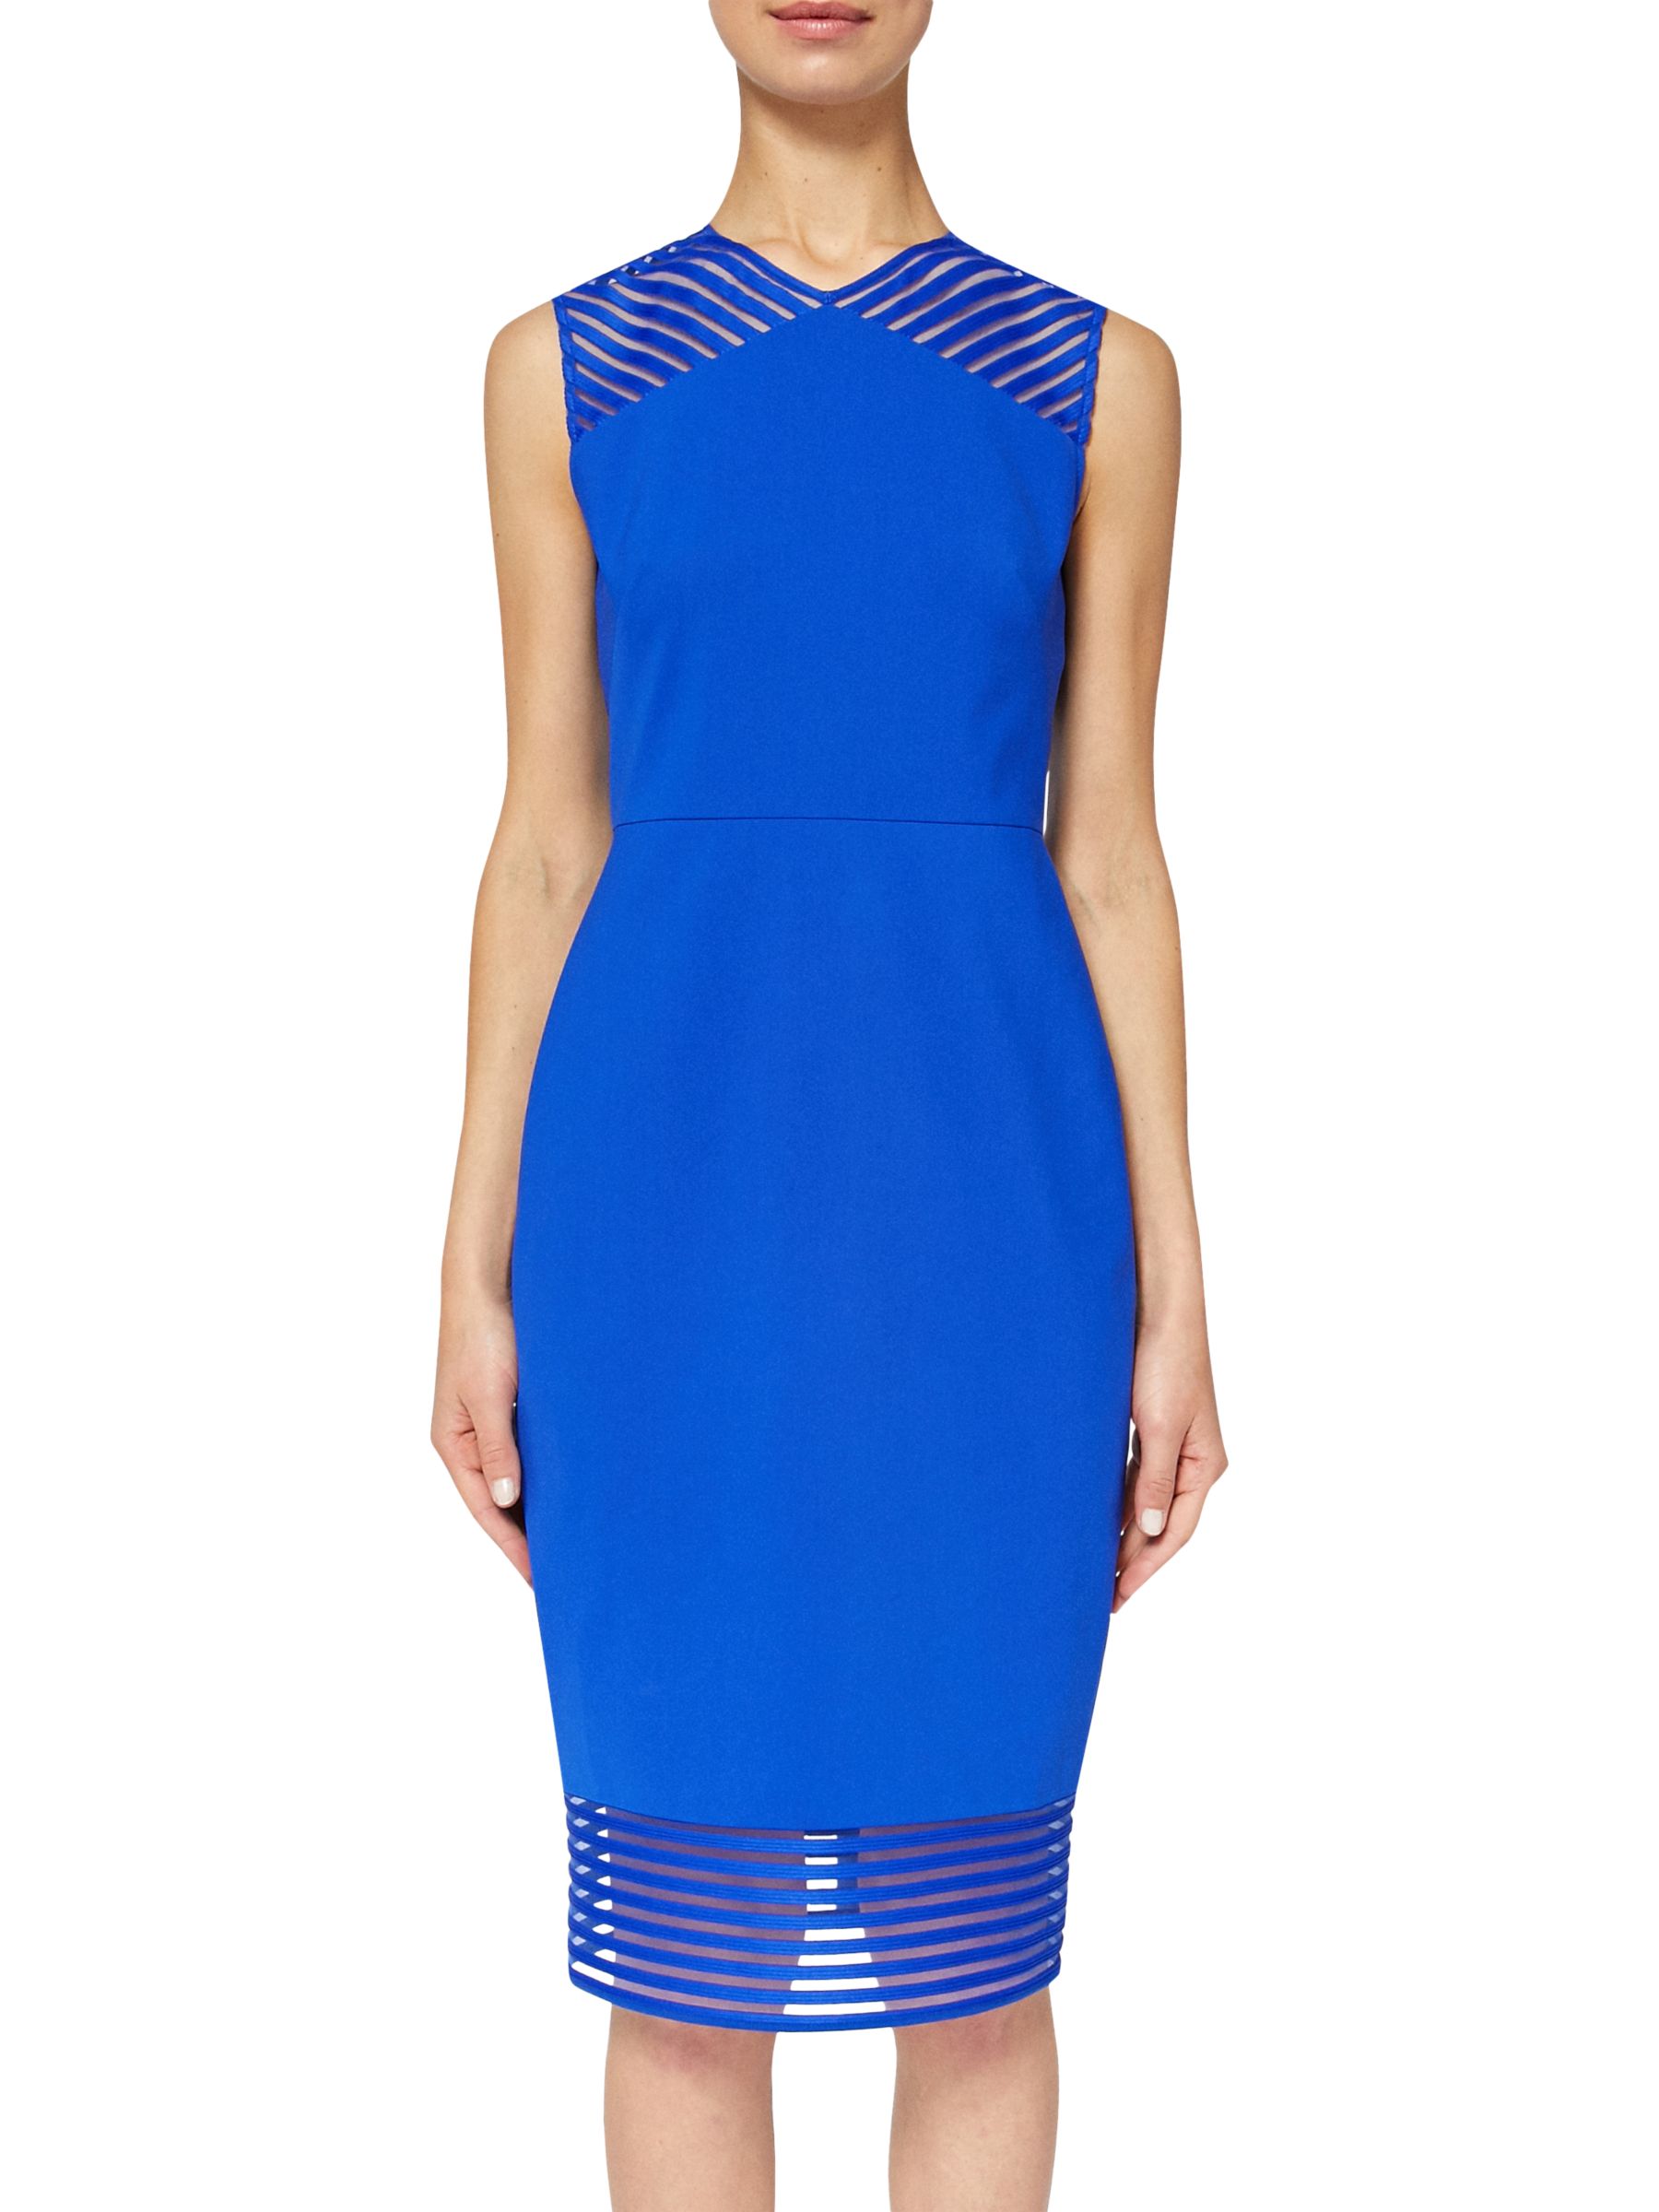 Ted Baker Lucette Bodycon Dress, Bright ...